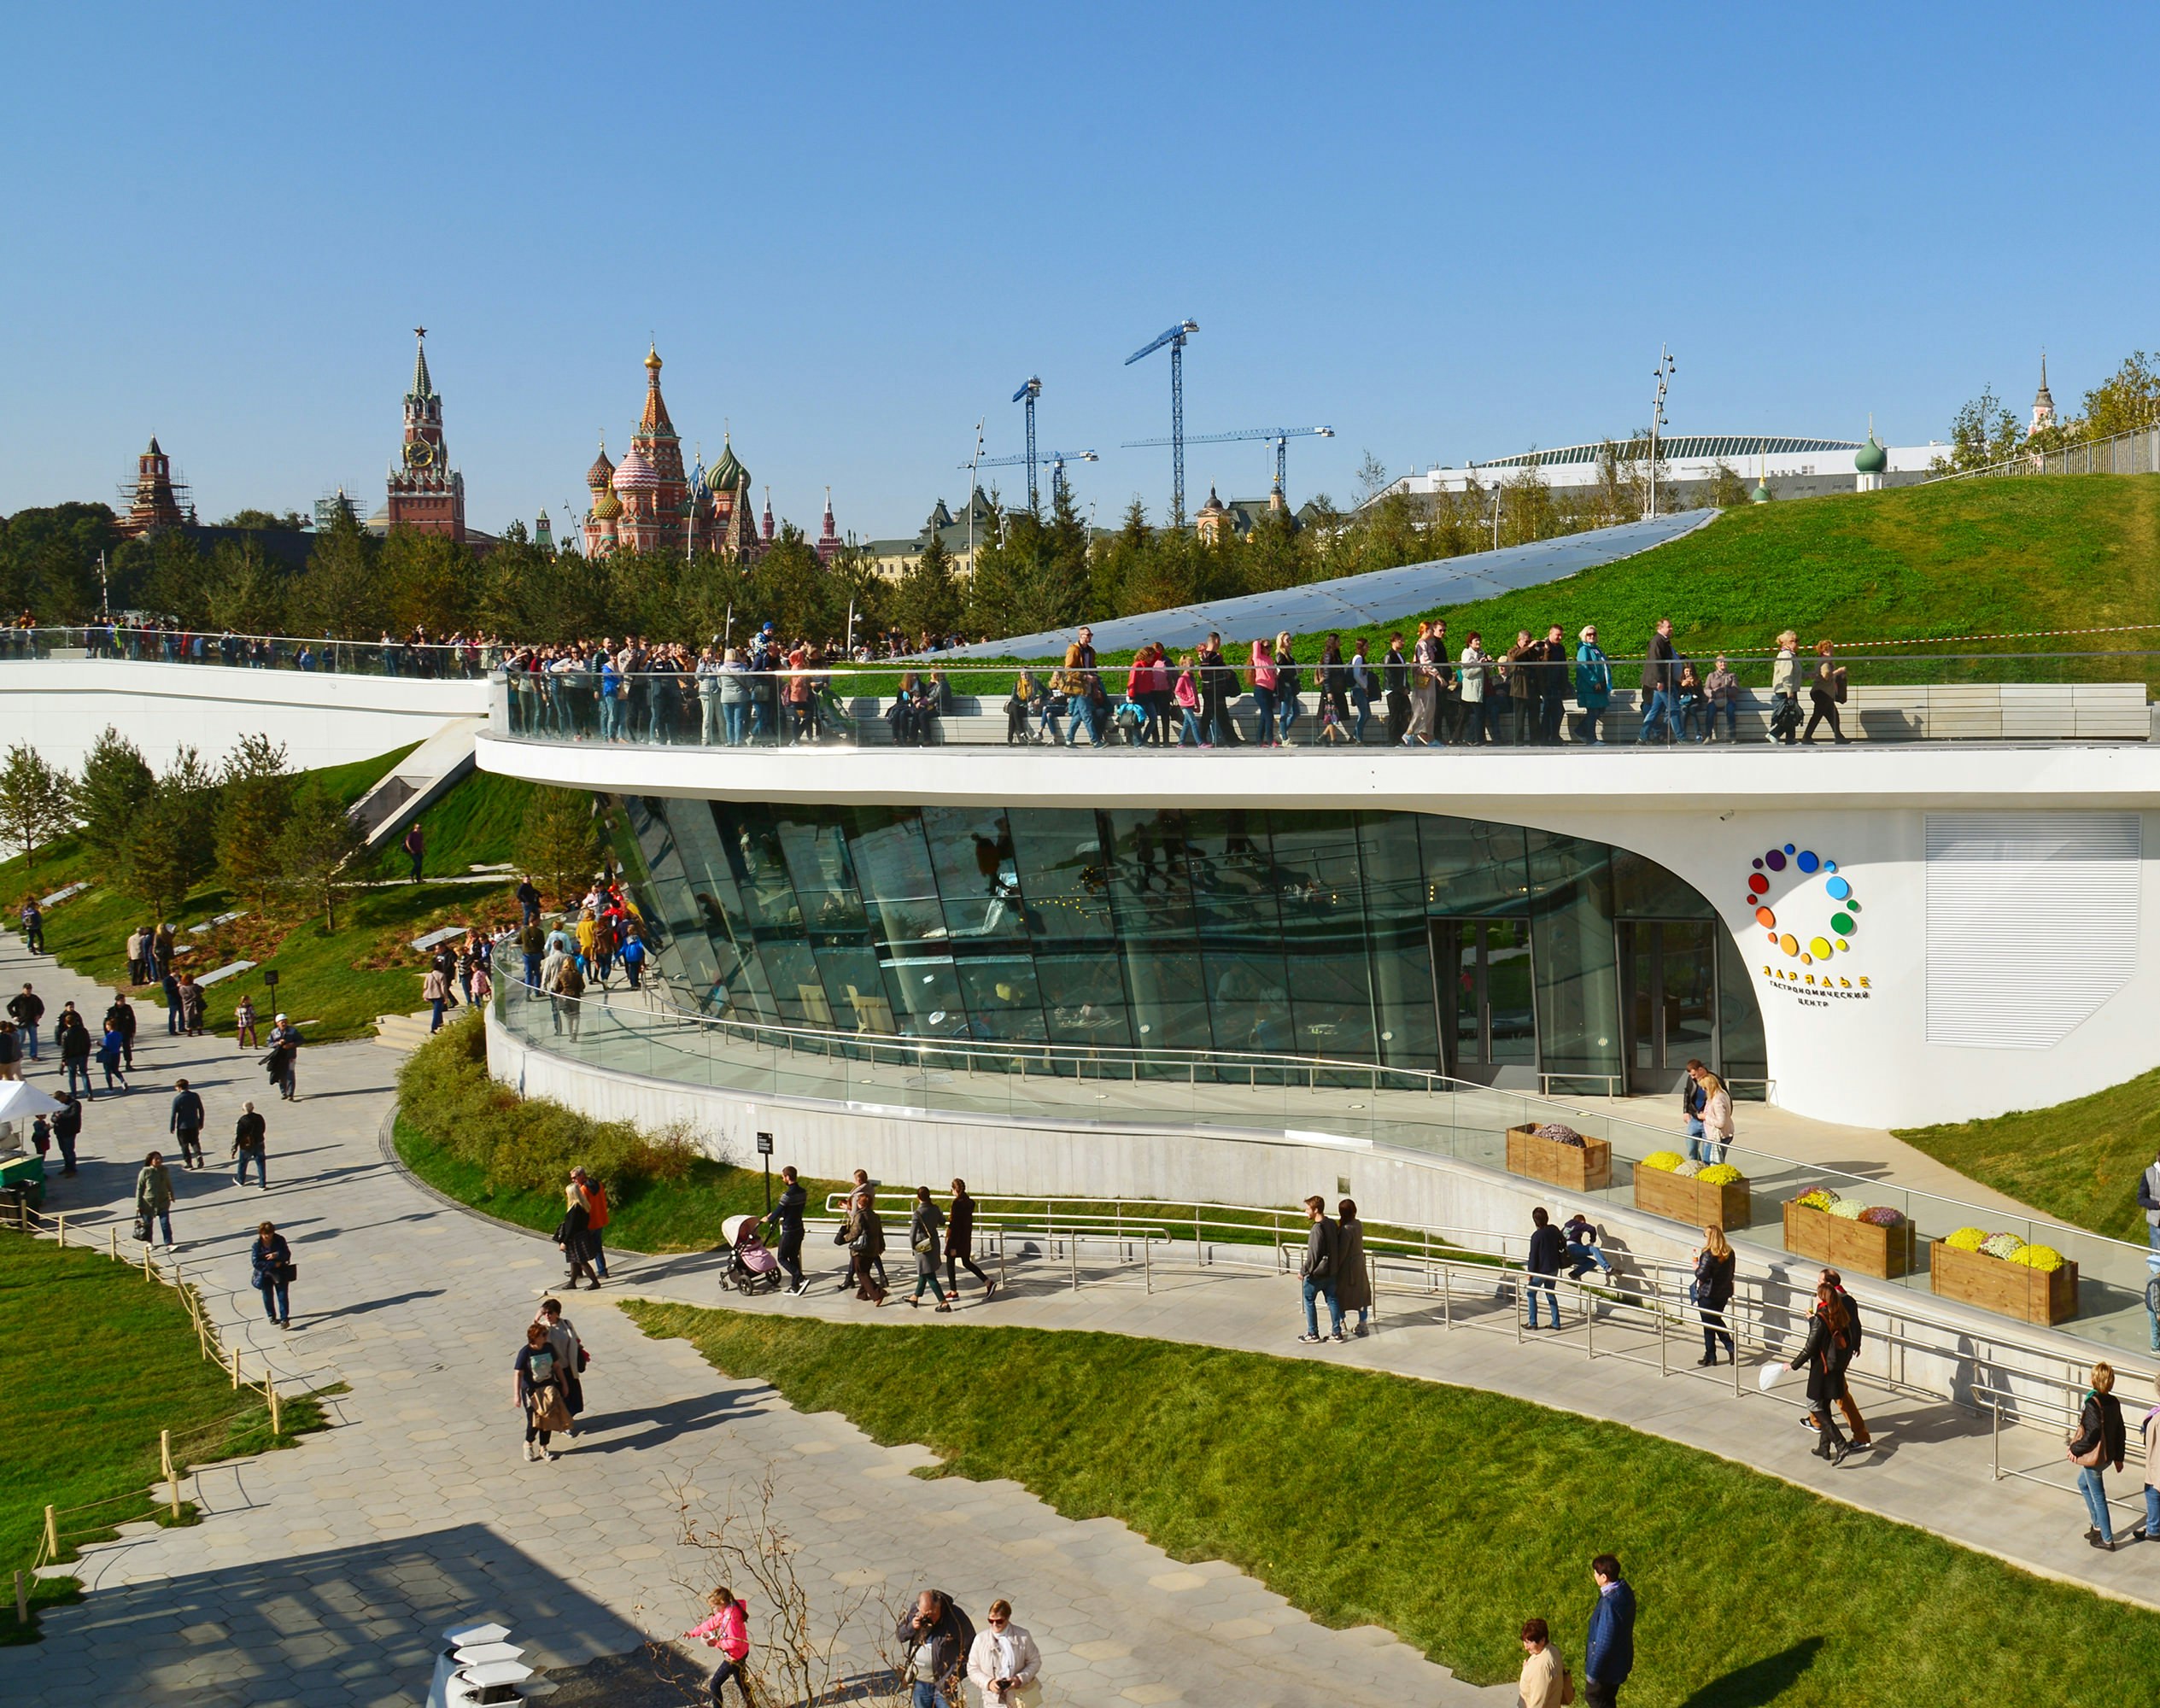 Zaryadye - a landscape and architectural park. Many people stroll over concrete walkways surrounding a rounded building in parkland.